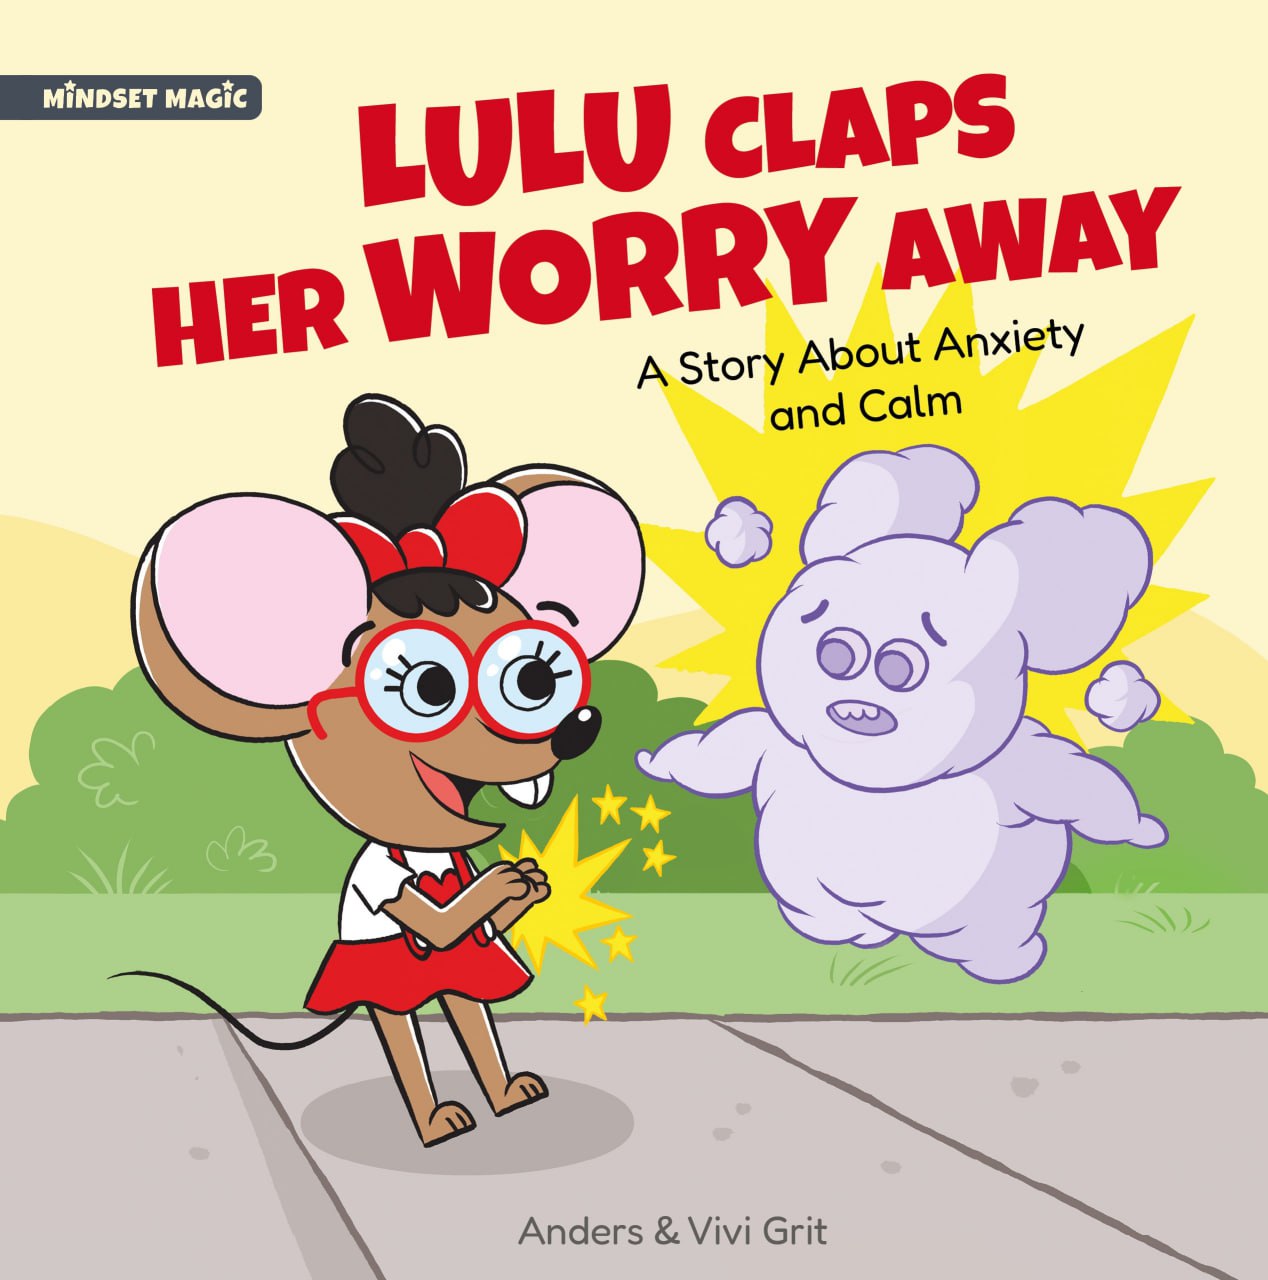 Lulu Claps Her Worry Away book cover.jpeg__PID:fdfc86bc-108b-4ed3-8a65-c47eb4f45de4